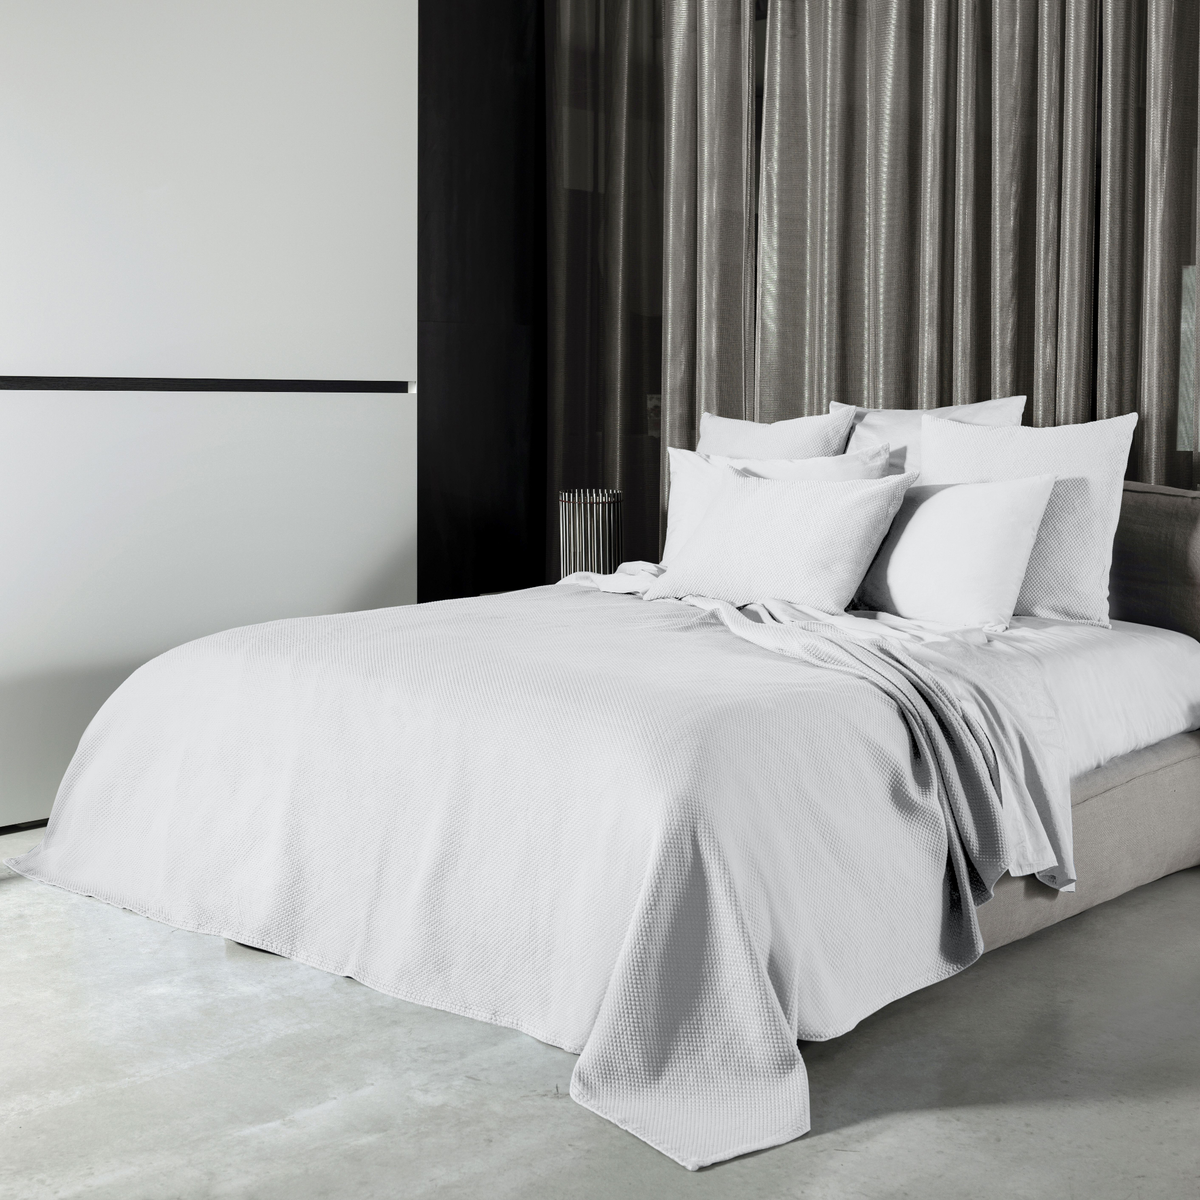 White Signoria Olivia Coverlet and Shams on a Bed in a Room